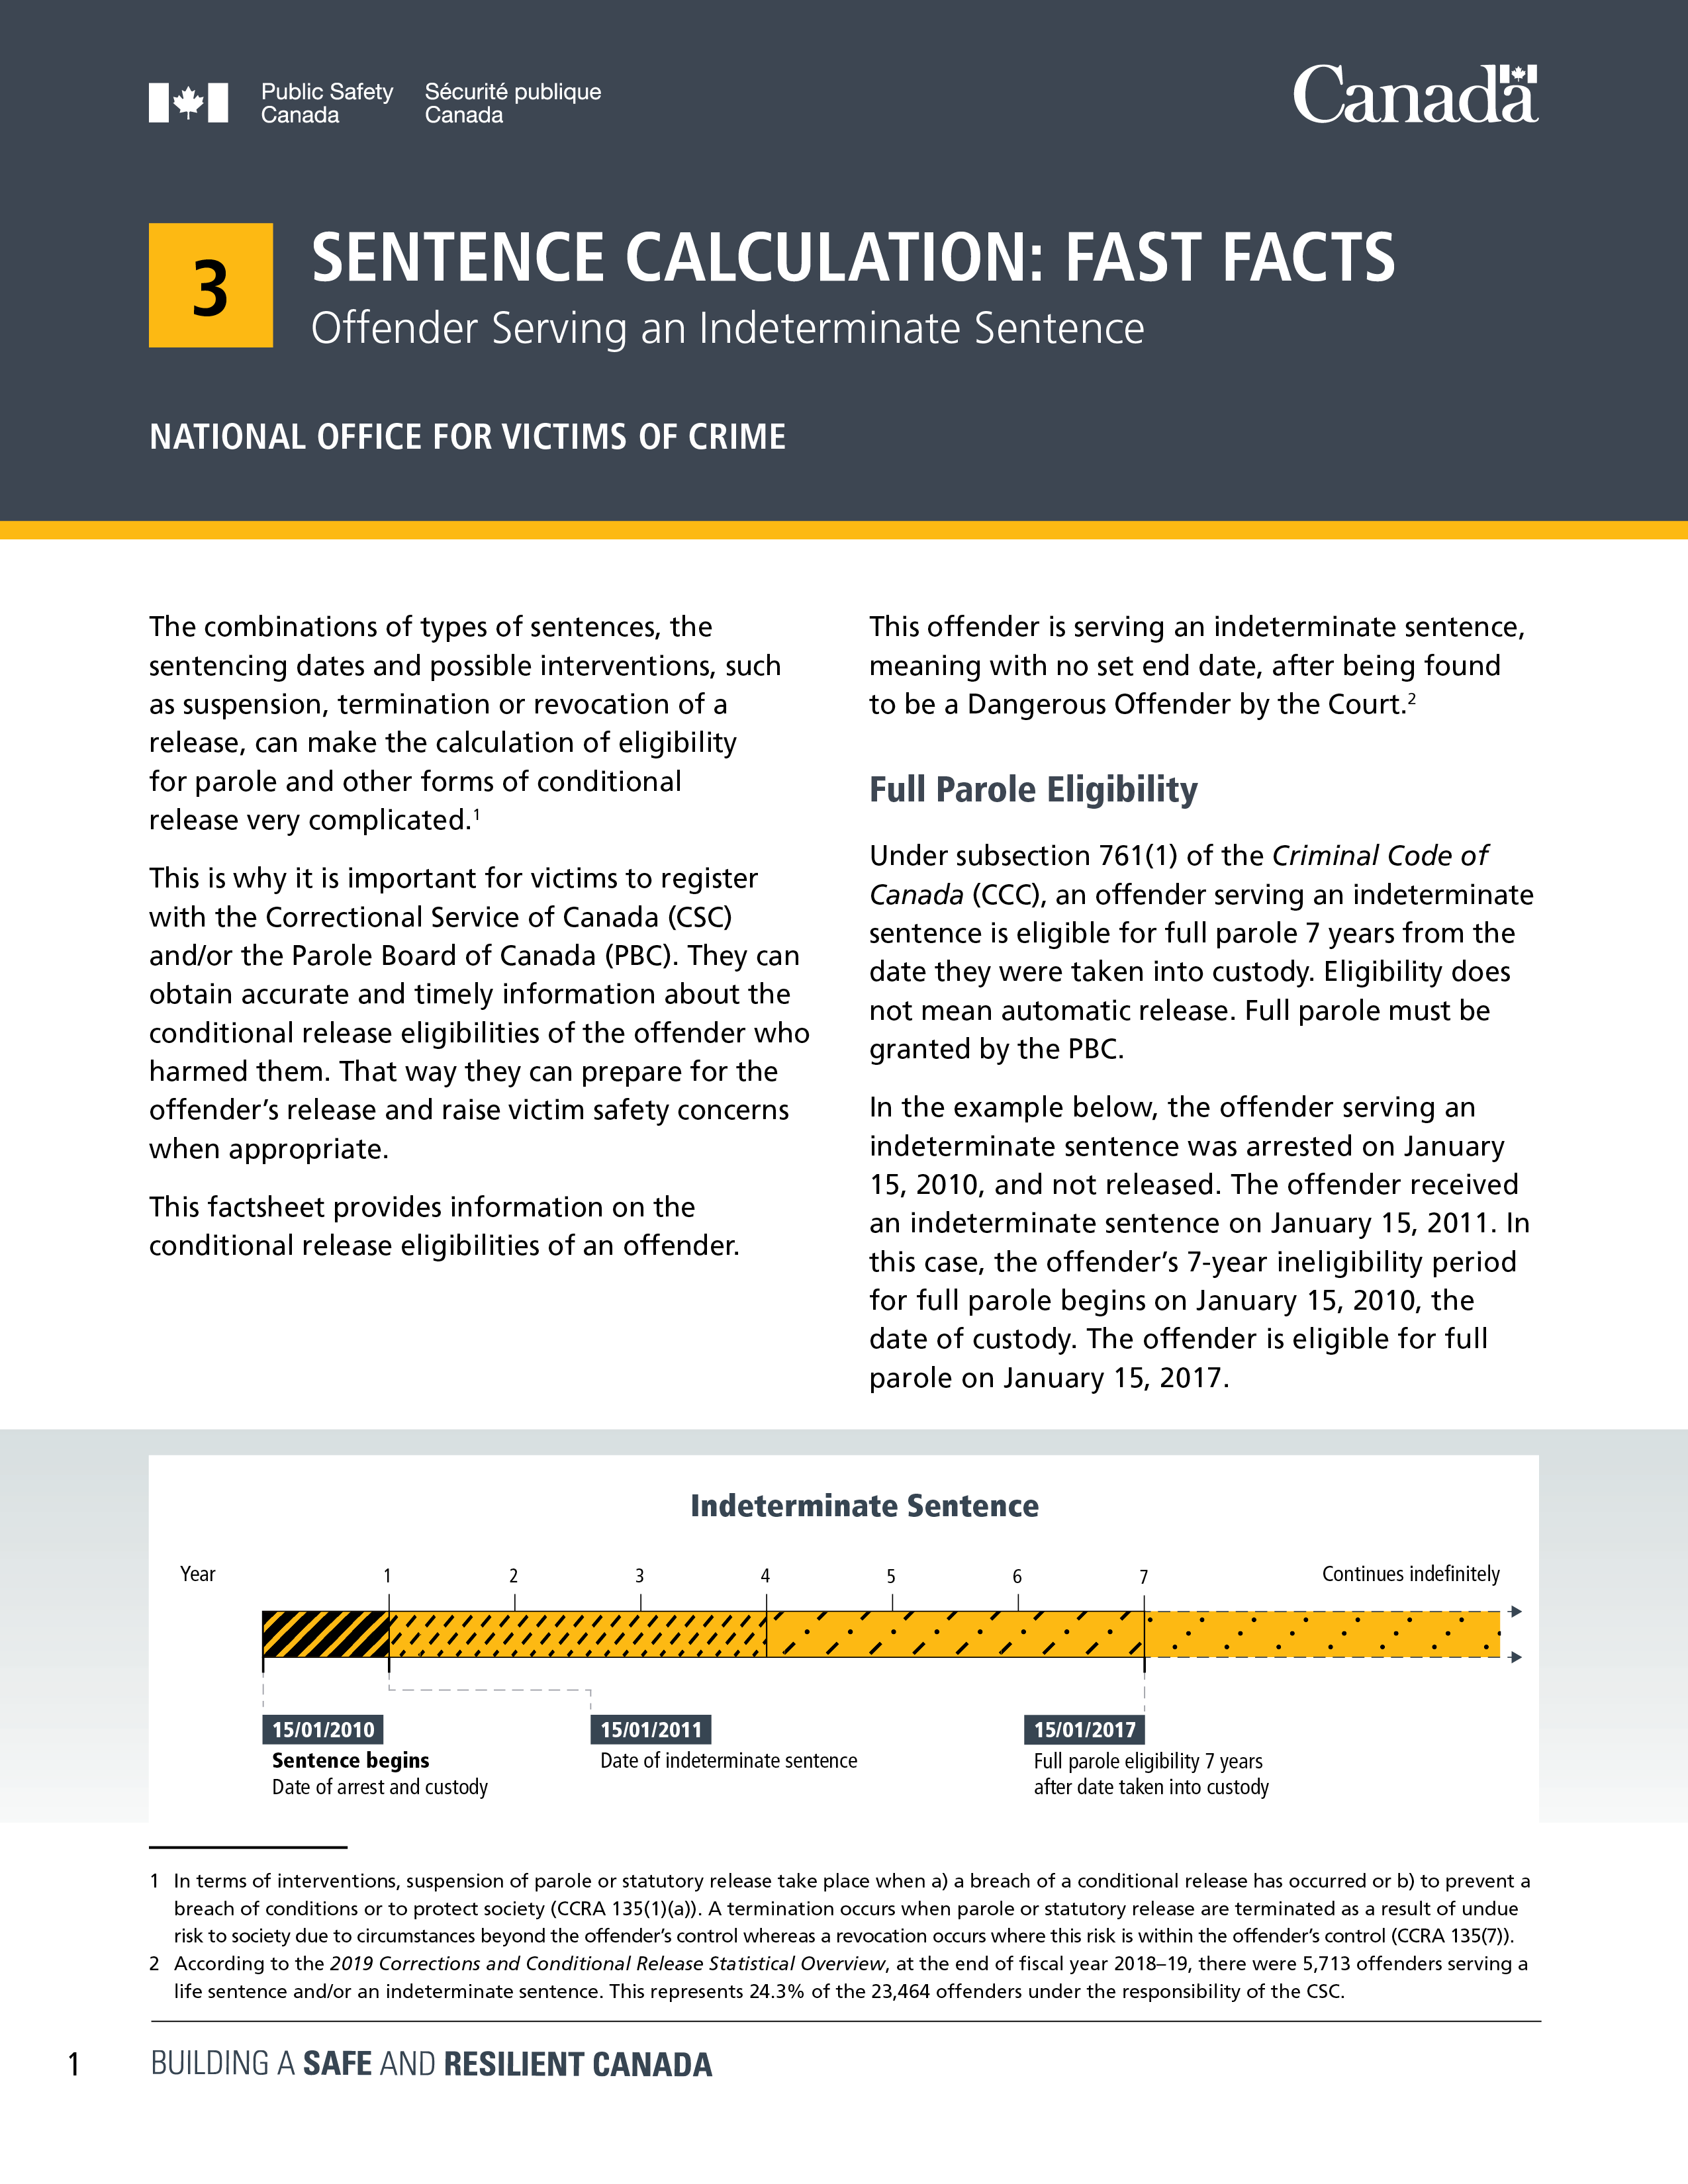 Sentence Calculation: Fast Facts: Offender Serving An Indeterminate Sentence